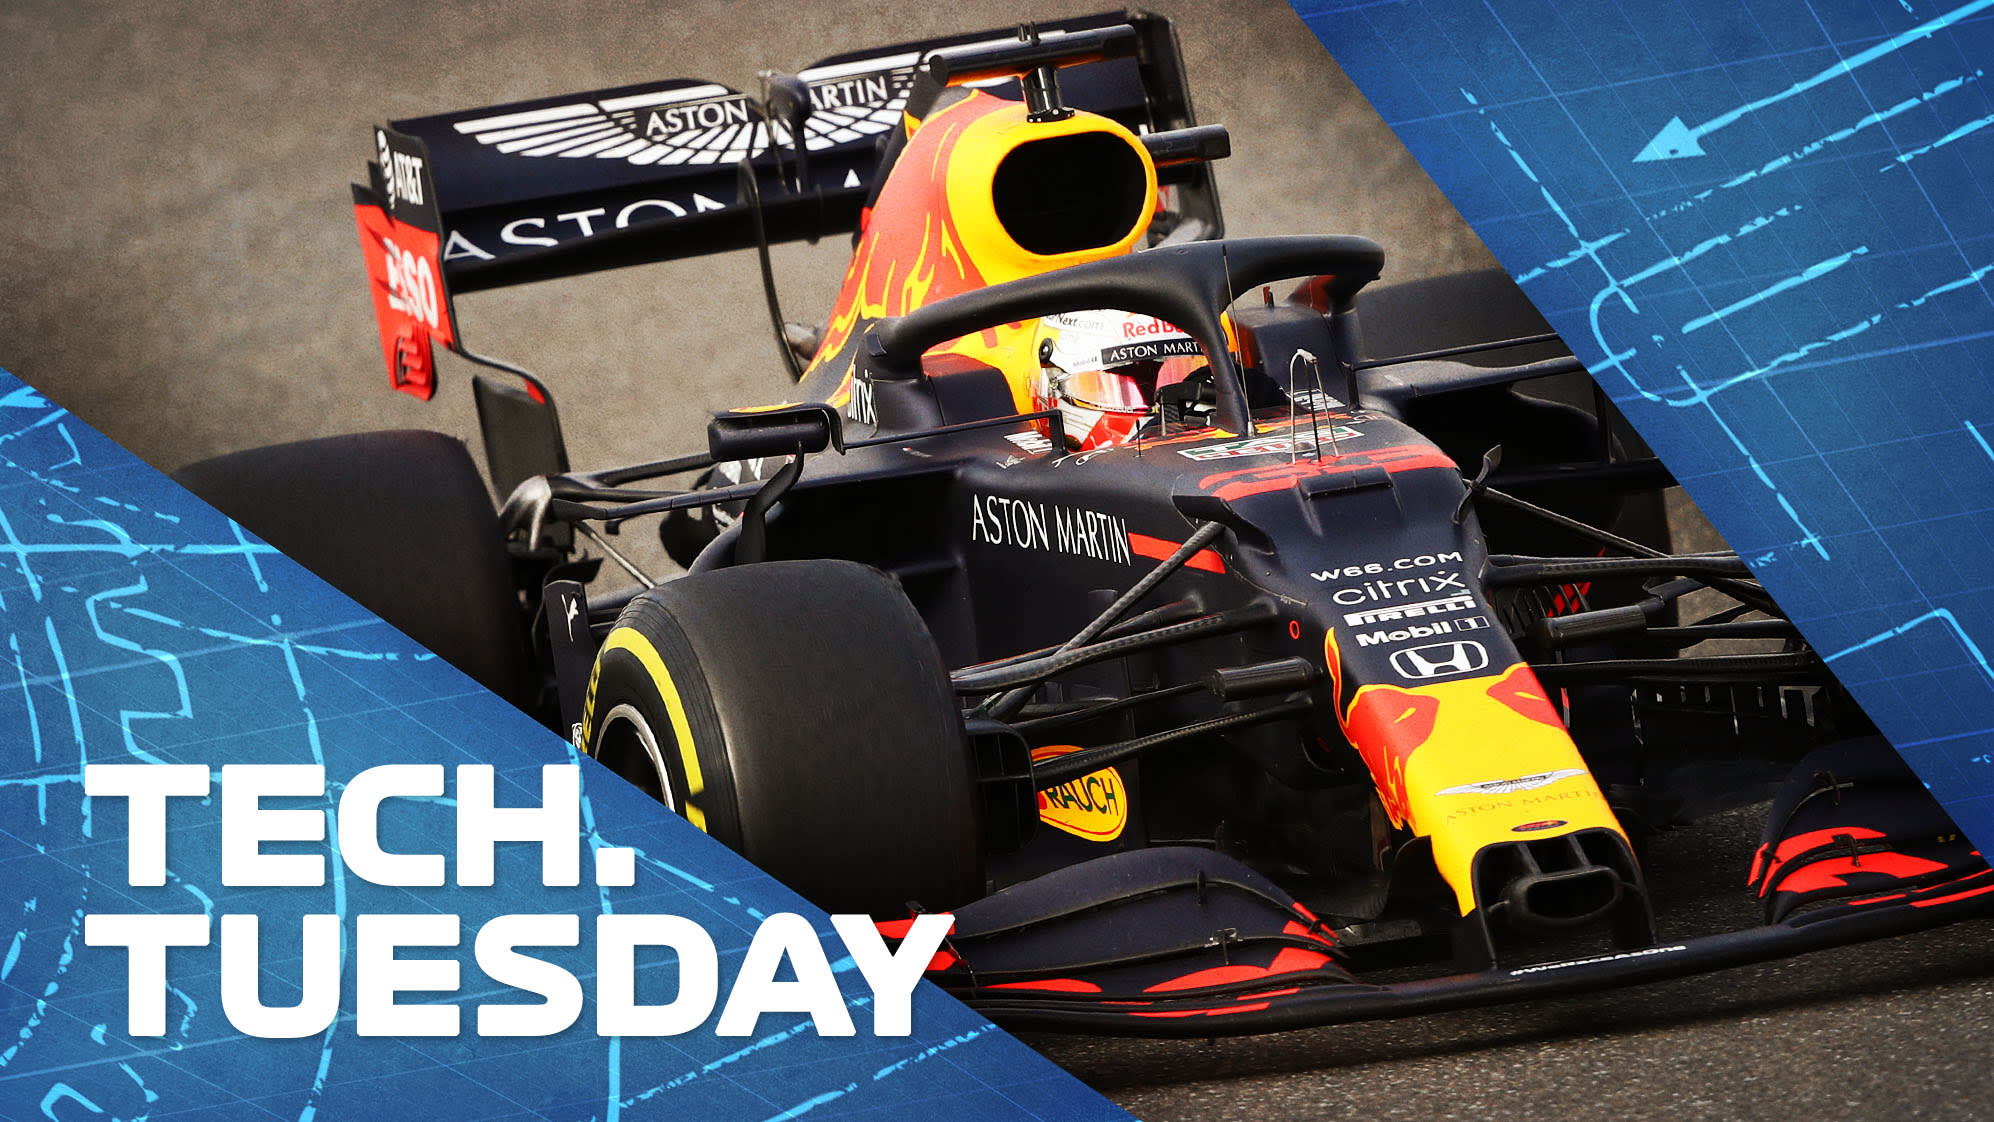 TECH TUESDAY: The RB16 upgrades allowing Red Bull to close the gap